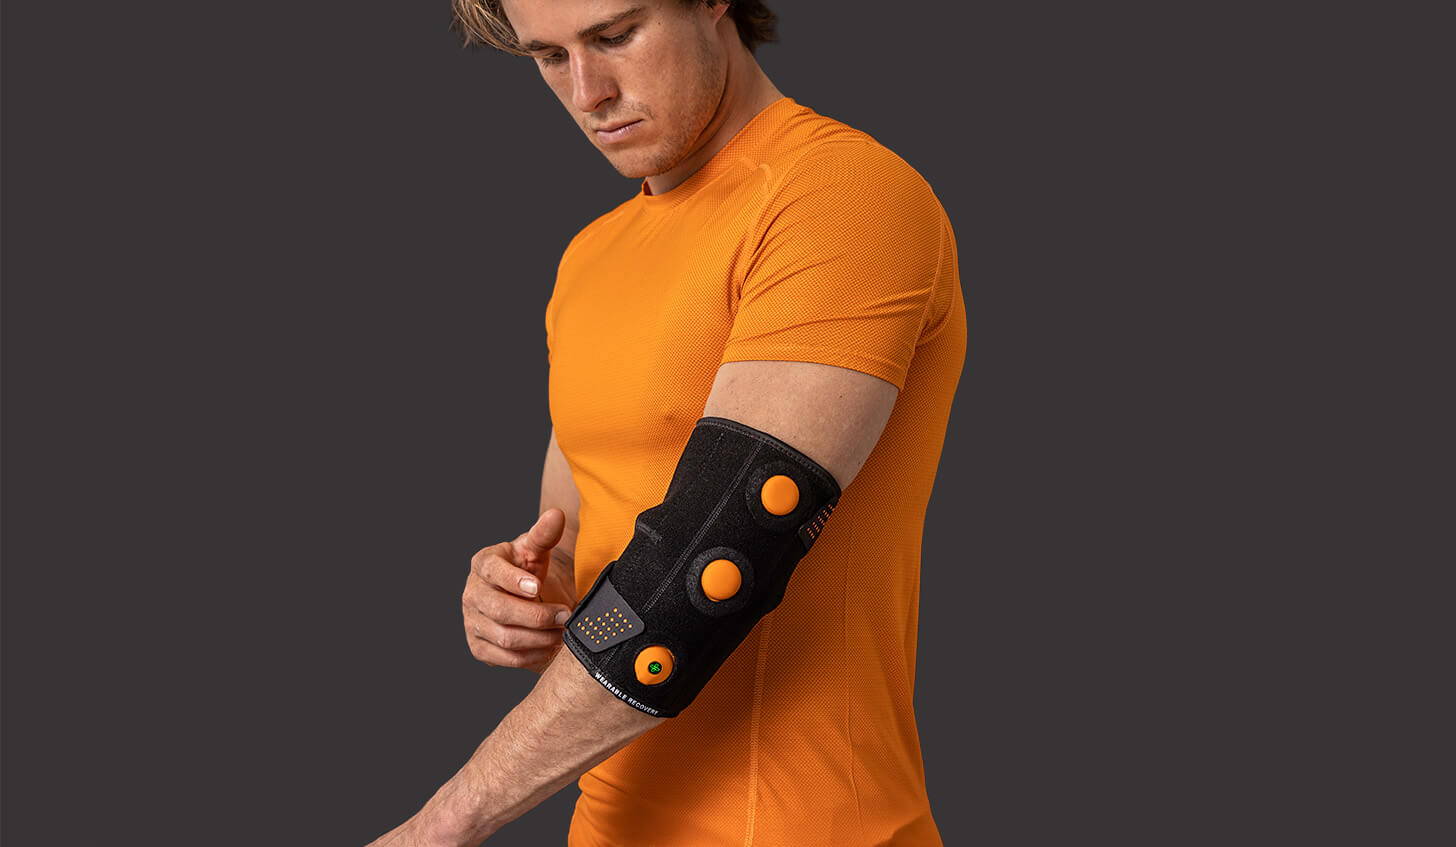 Myovolt Focal Vibration Arm device is a wearable physiotherapy treatment for repetitive sports injuries such as tennis elbow.